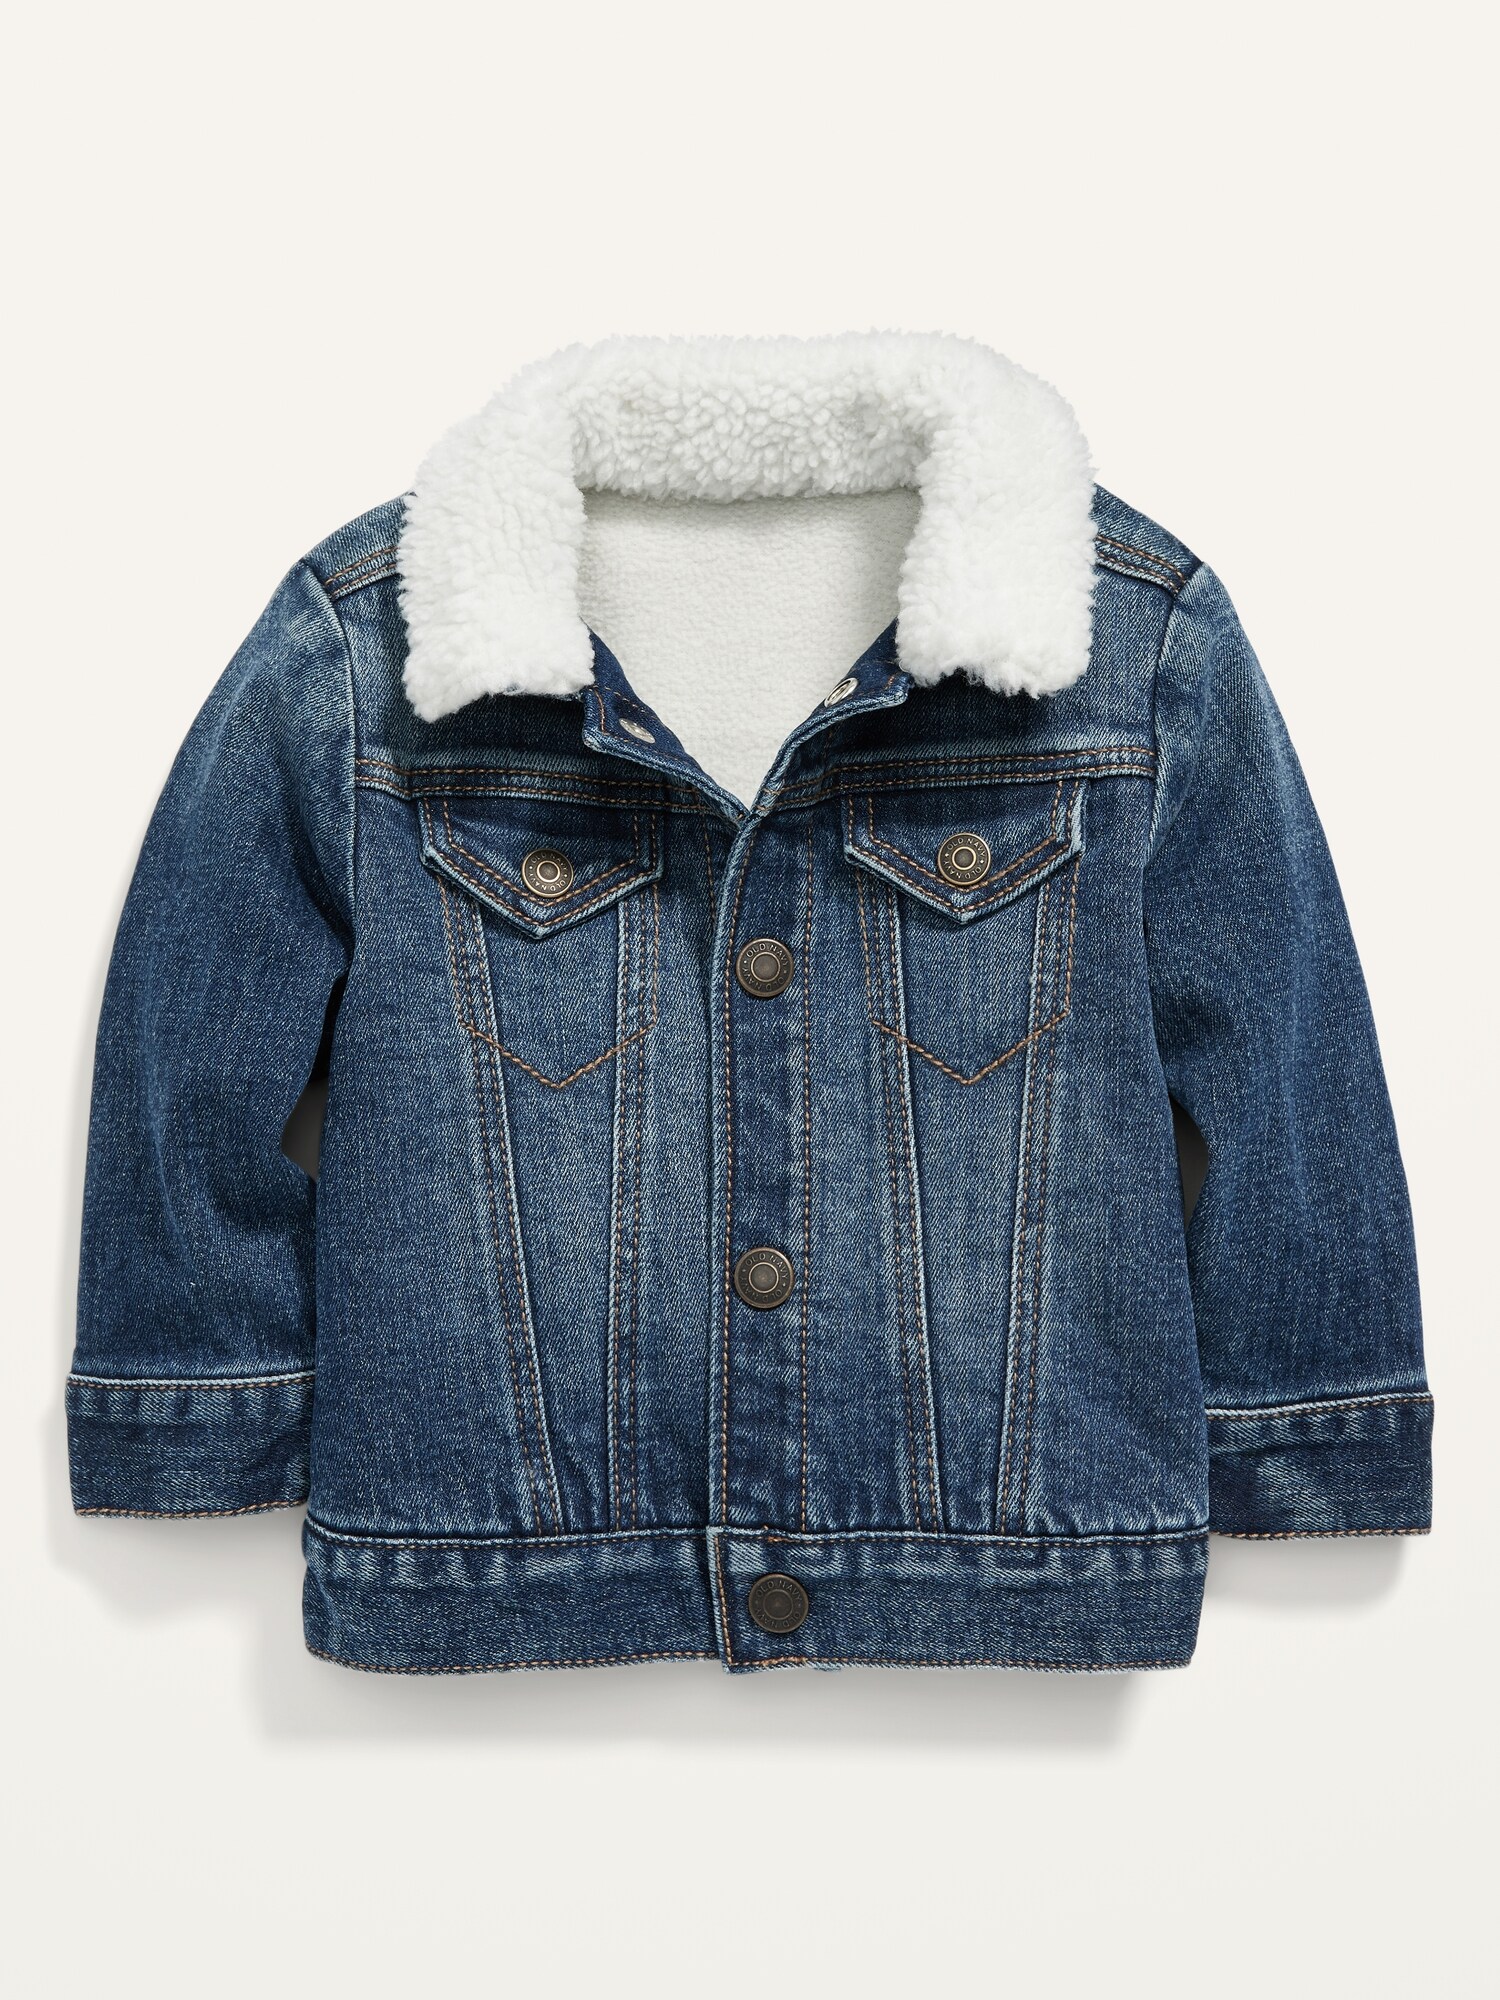 Unisex Sherpa-Lined Jean Trucker Jacket for Baby | Old Navy